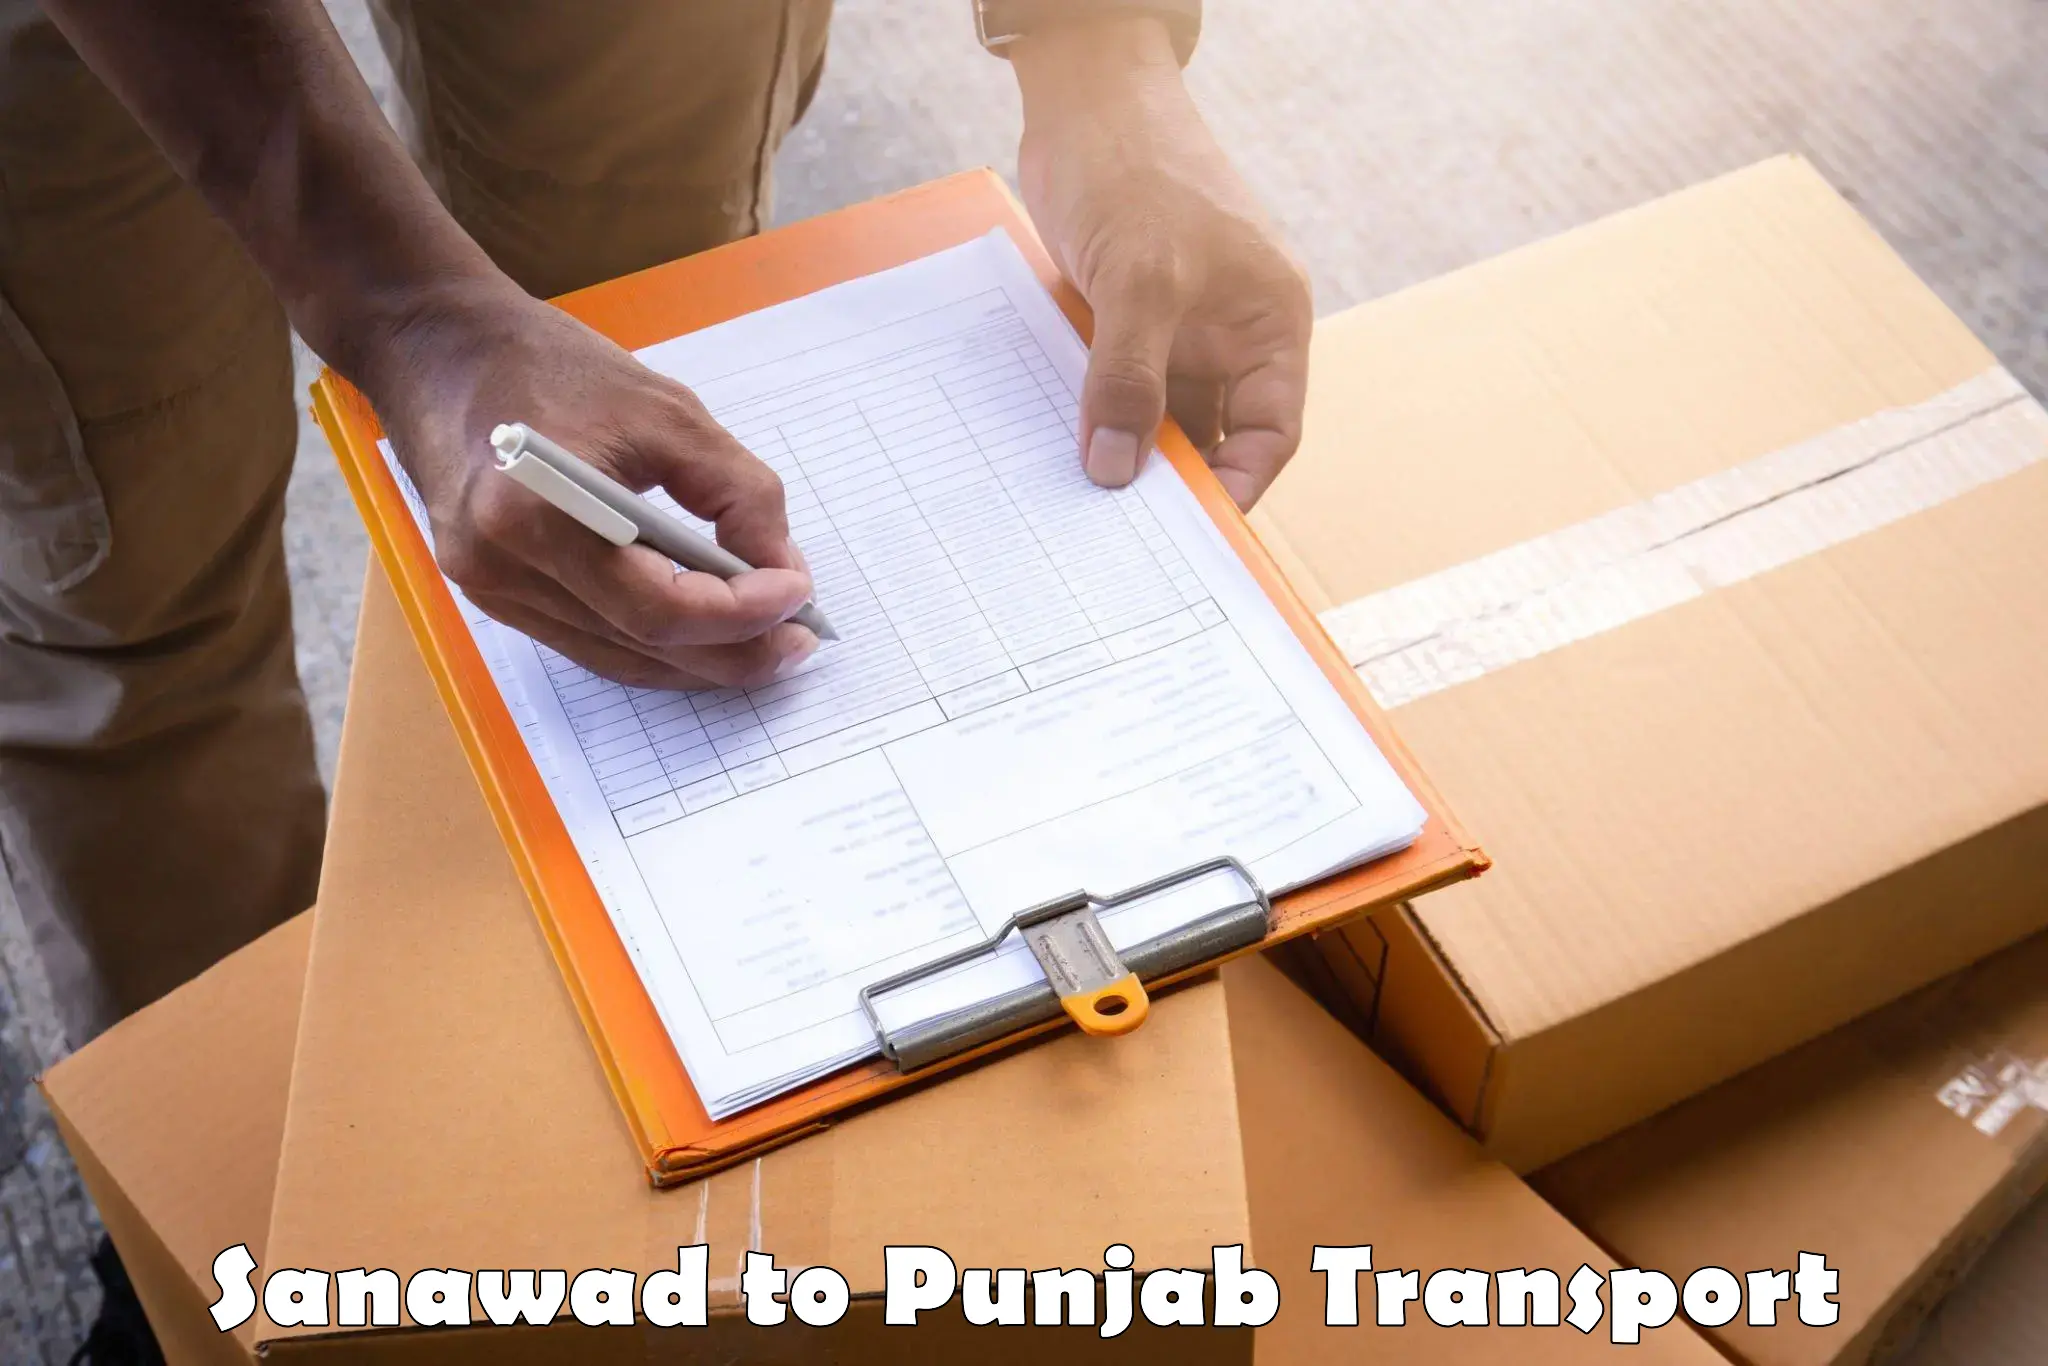 Road transport online services Sanawad to Ludhiana